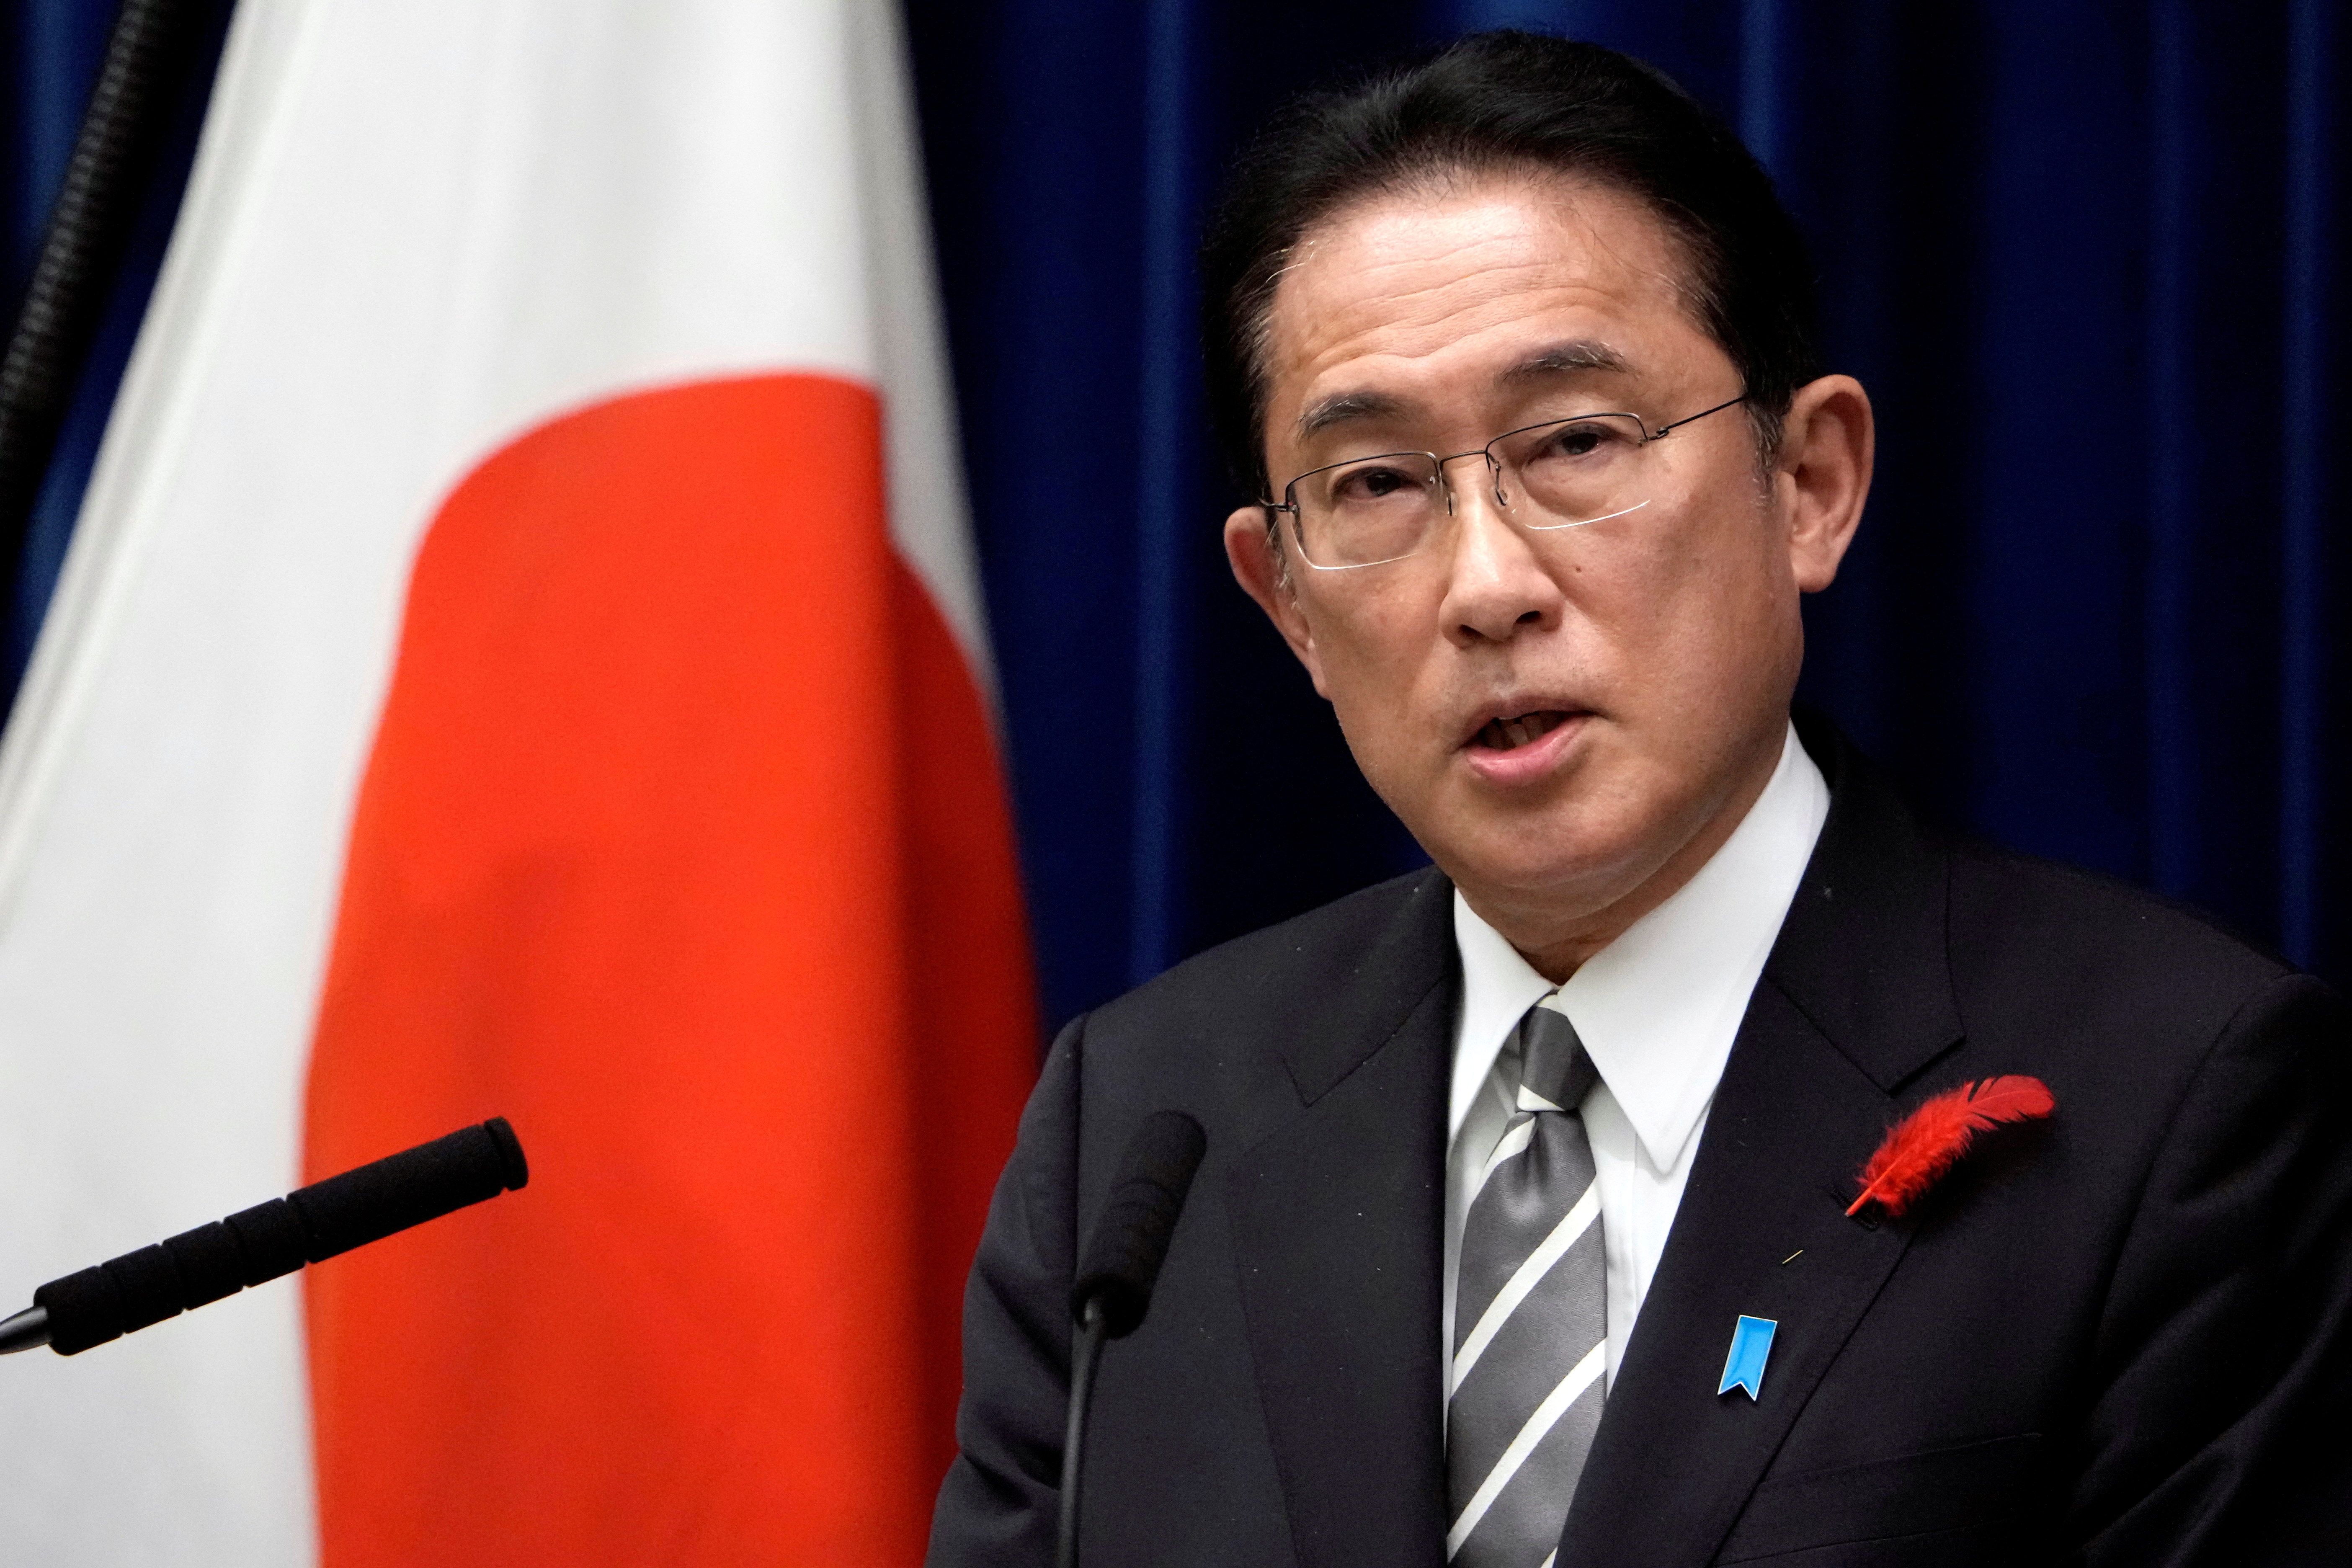 Japanese Prime Minister Fumio Kishida speaks during a news conference at the prime minister's official residence in Tokyo, Japan October 14, 2021. Eugene Hoshiko/Pool via REUTERS/File Photo